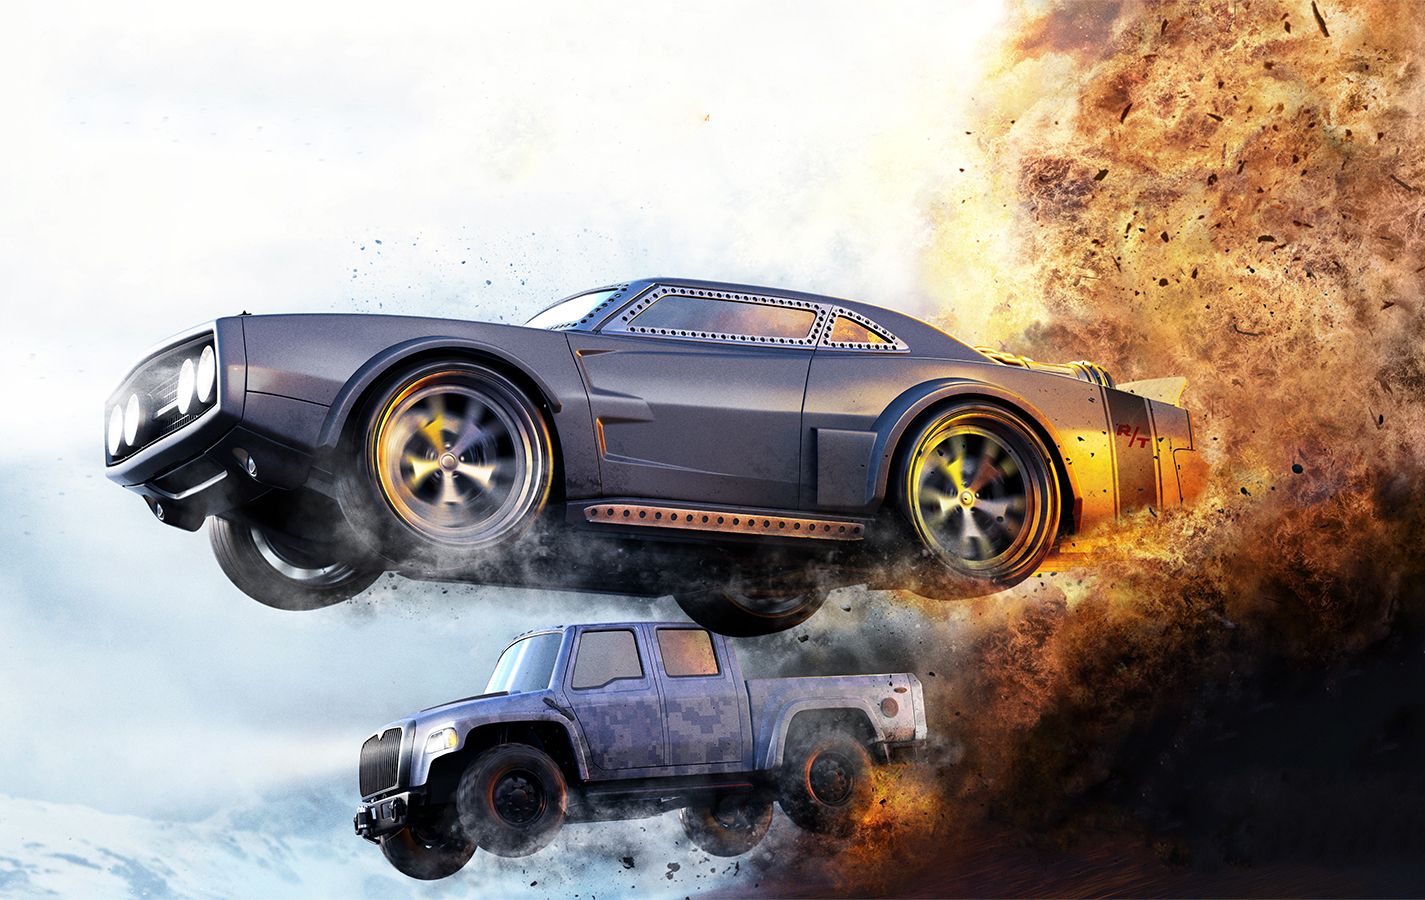 anki overdrive goes fast furious with new special movie edition image 1